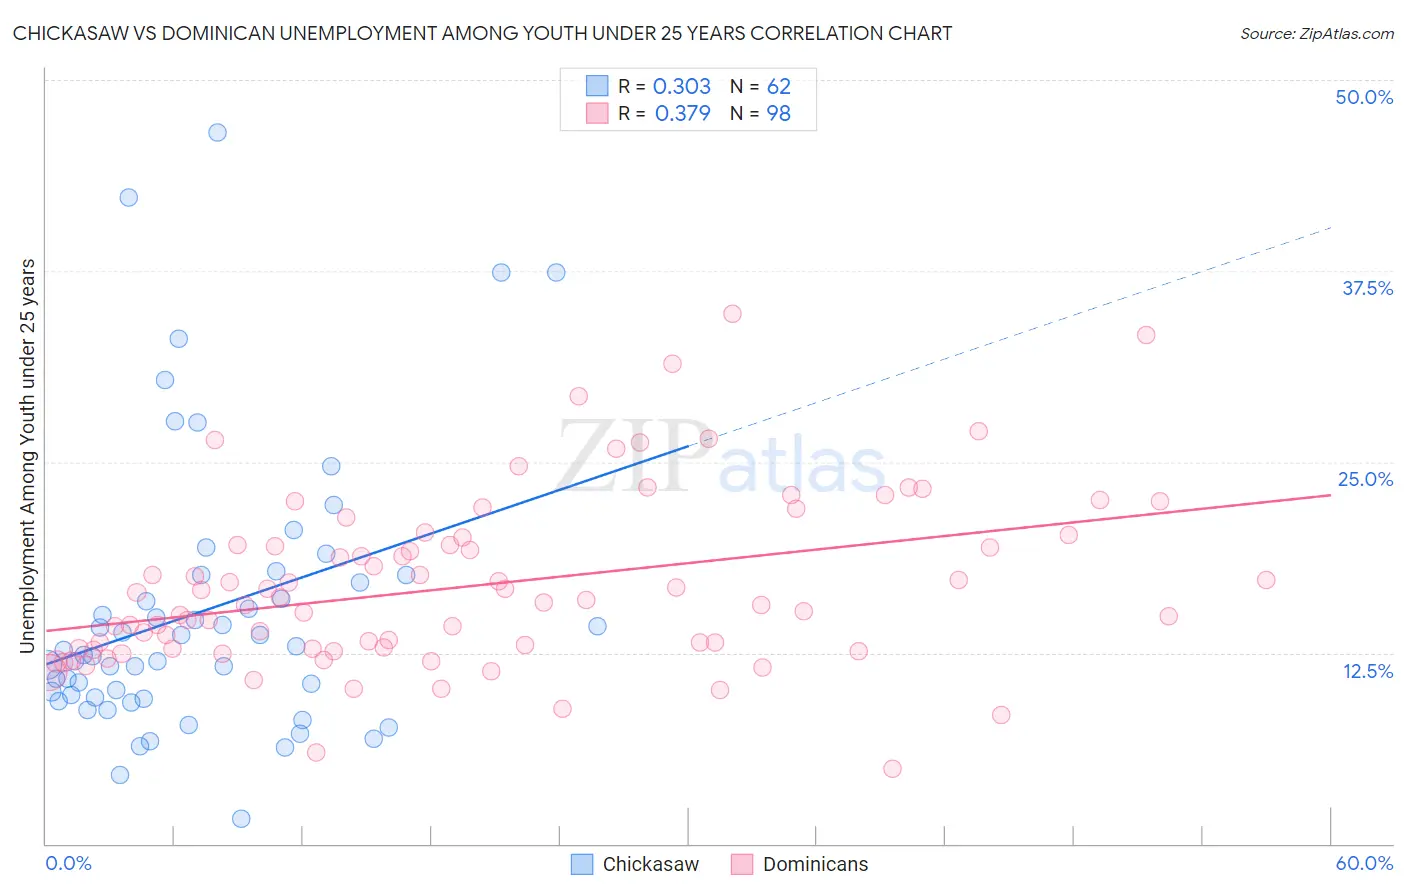 Chickasaw vs Dominican Unemployment Among Youth under 25 years